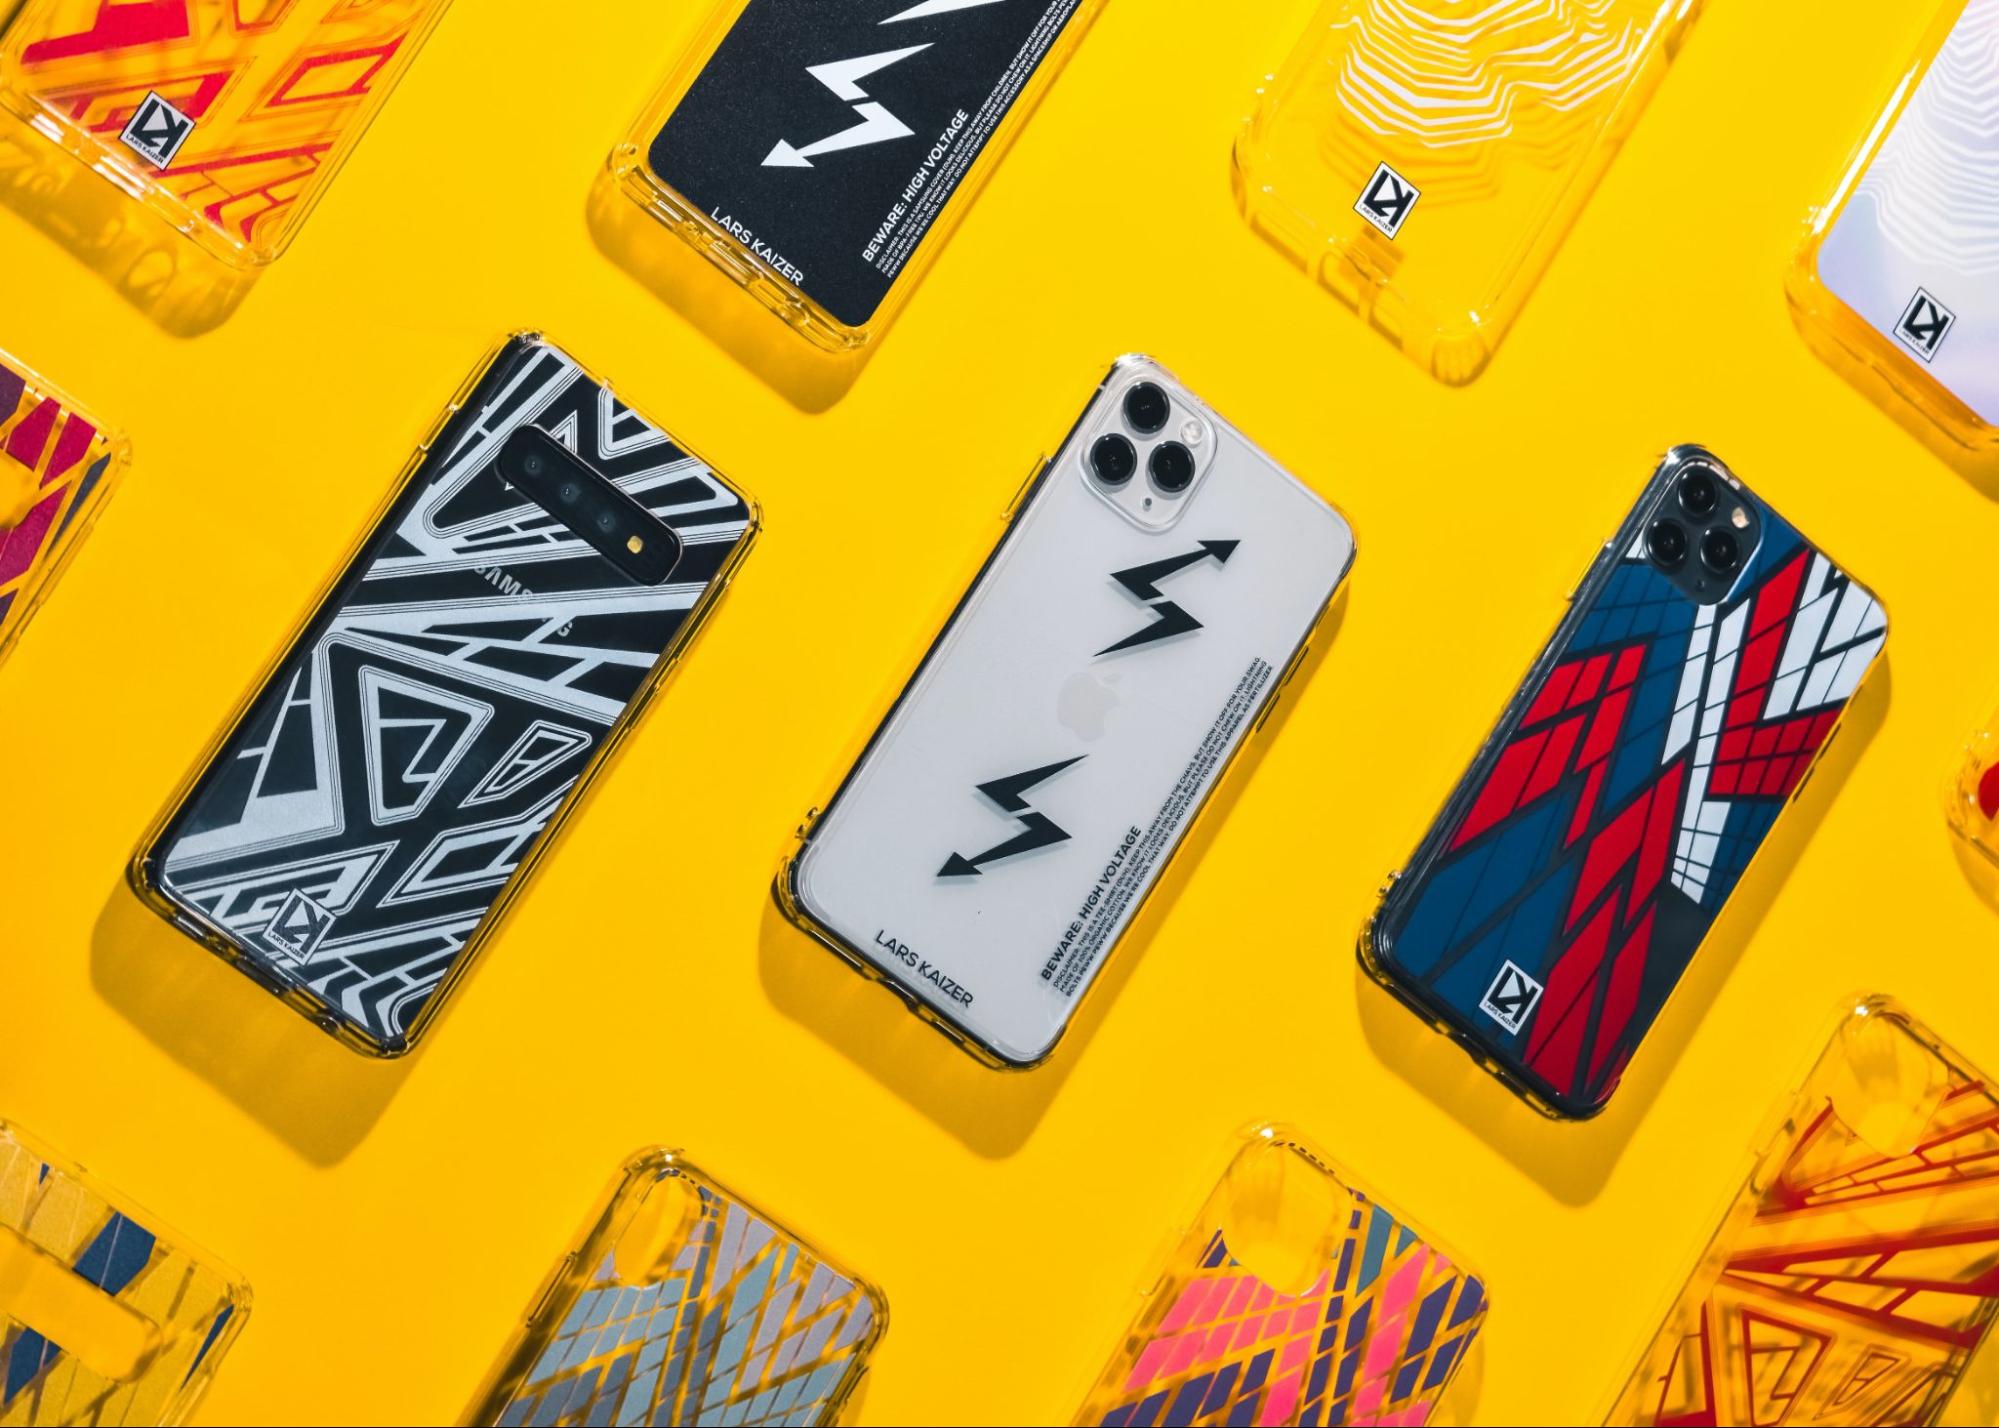 Selling phone case on Shopify